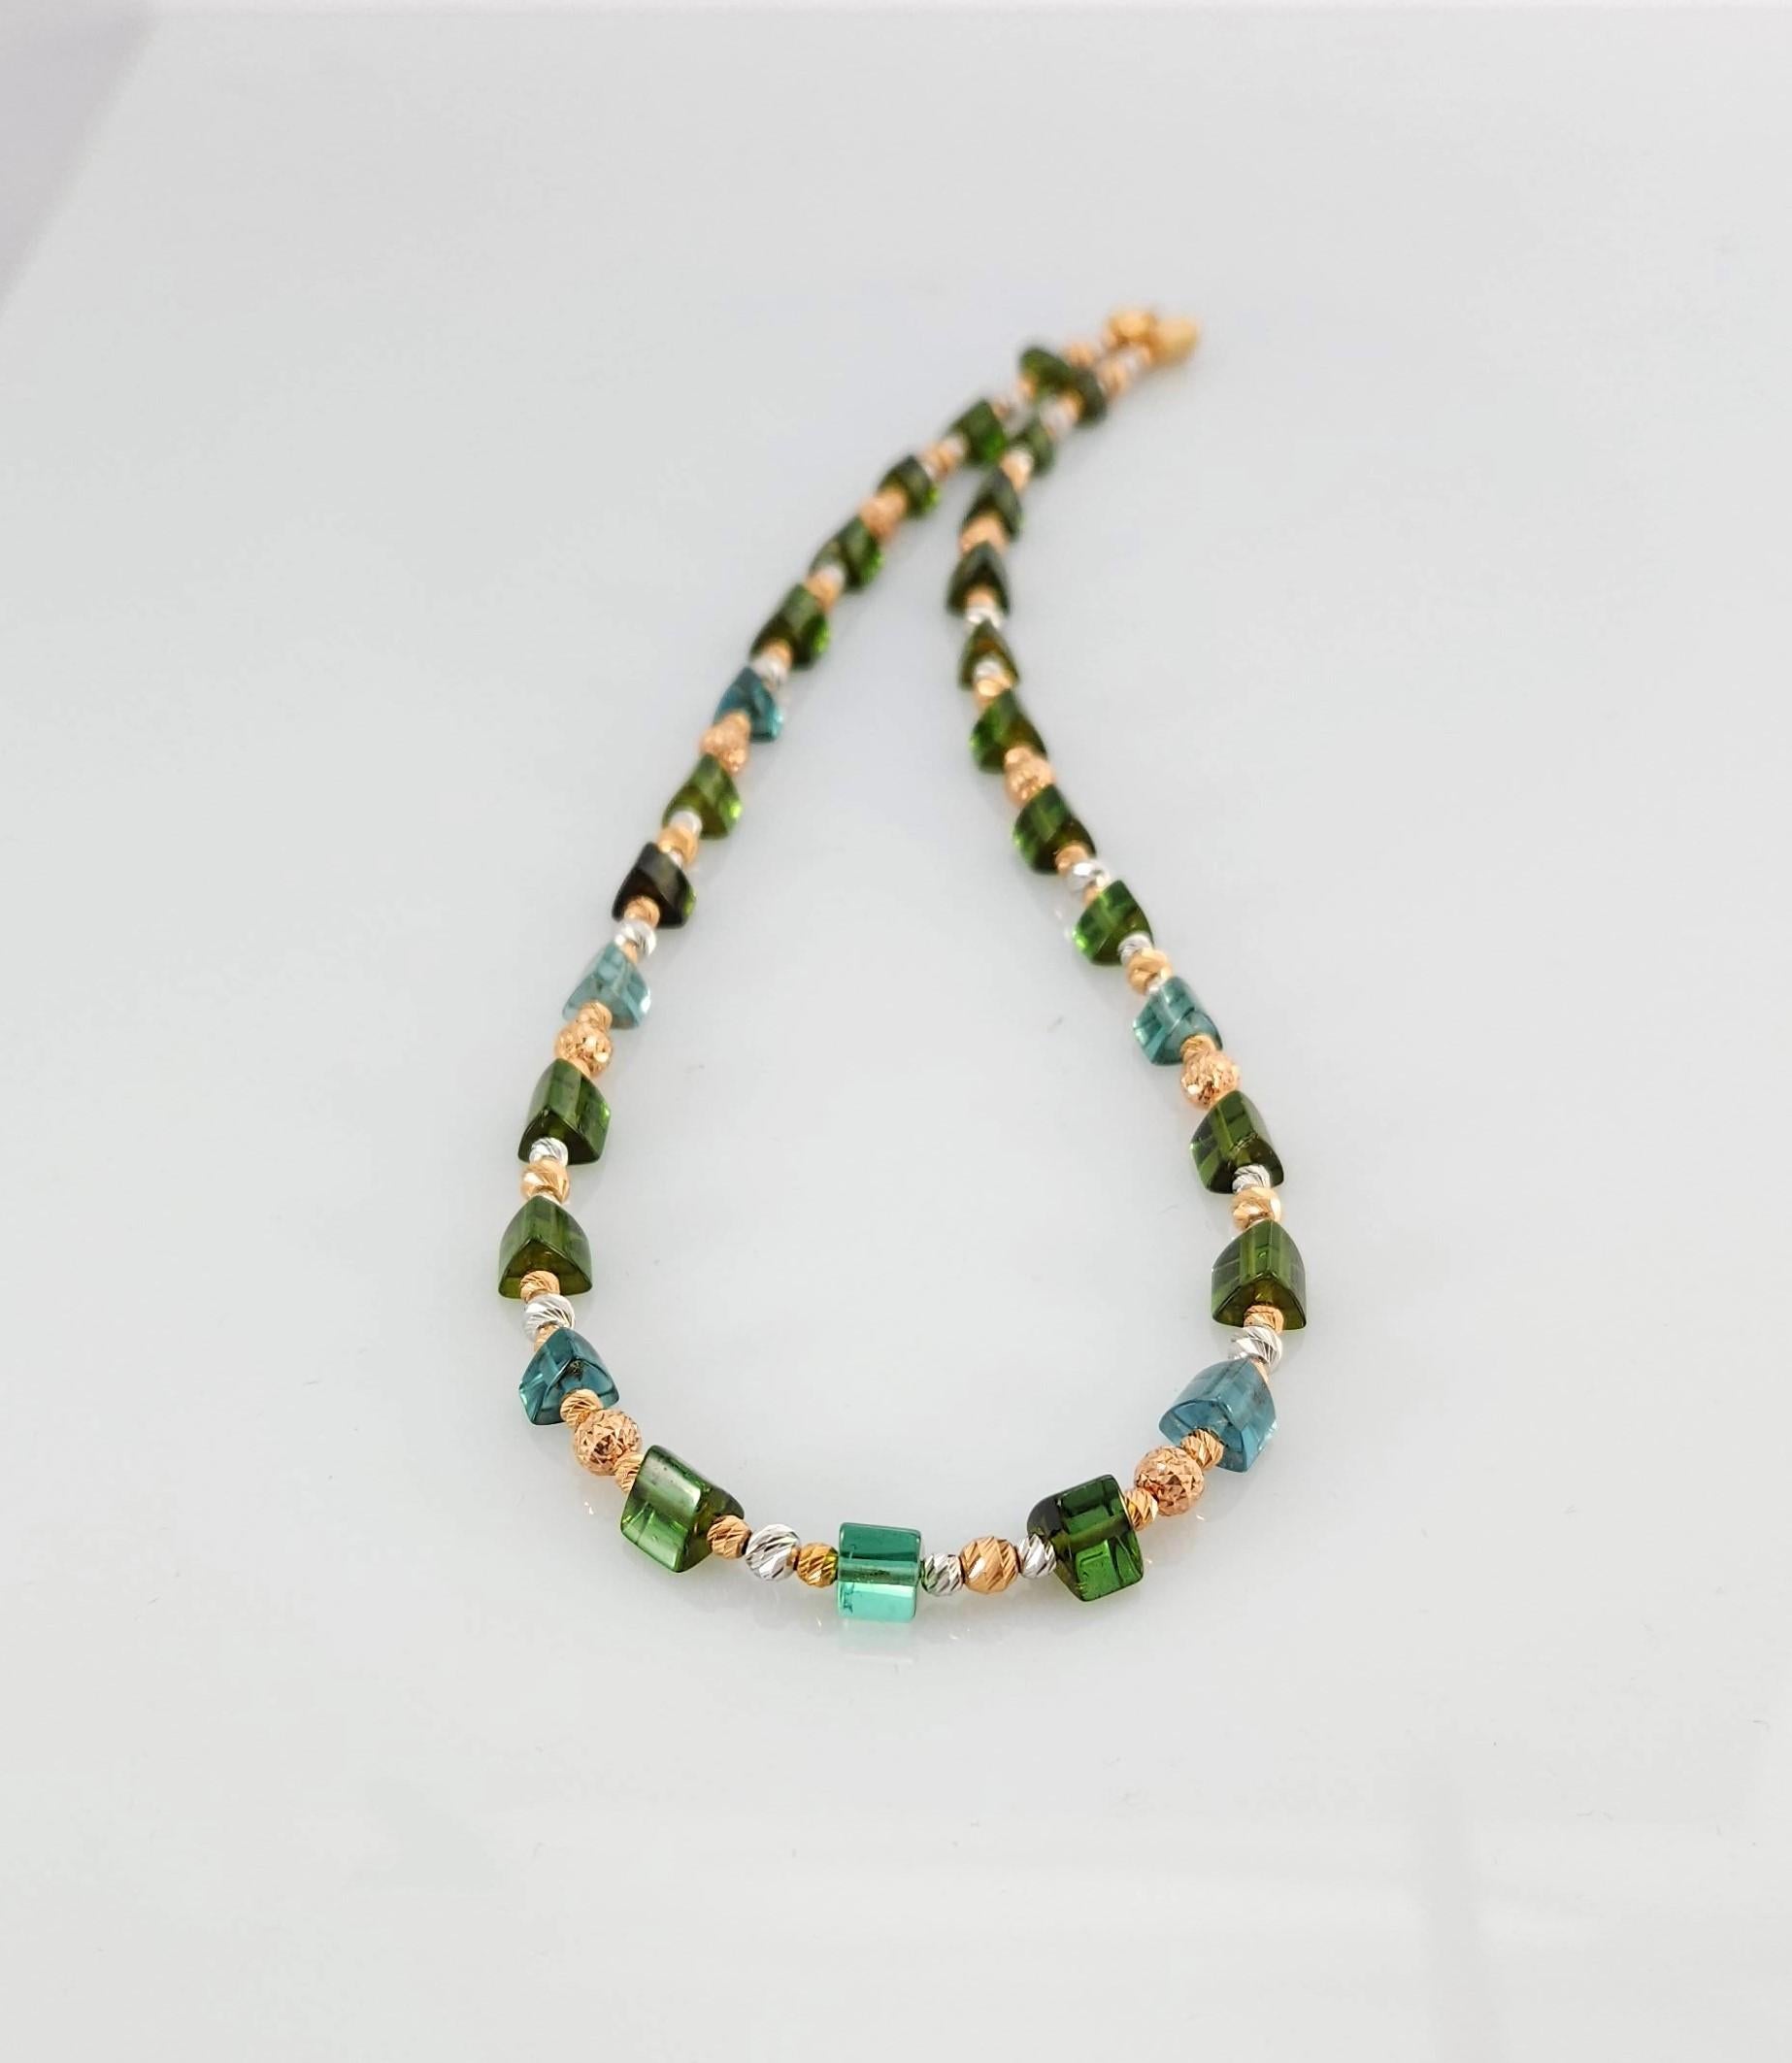 Green-Blue Tourmaline Crystal Beaded Necklace with 18 Carat Gold For Sale 5